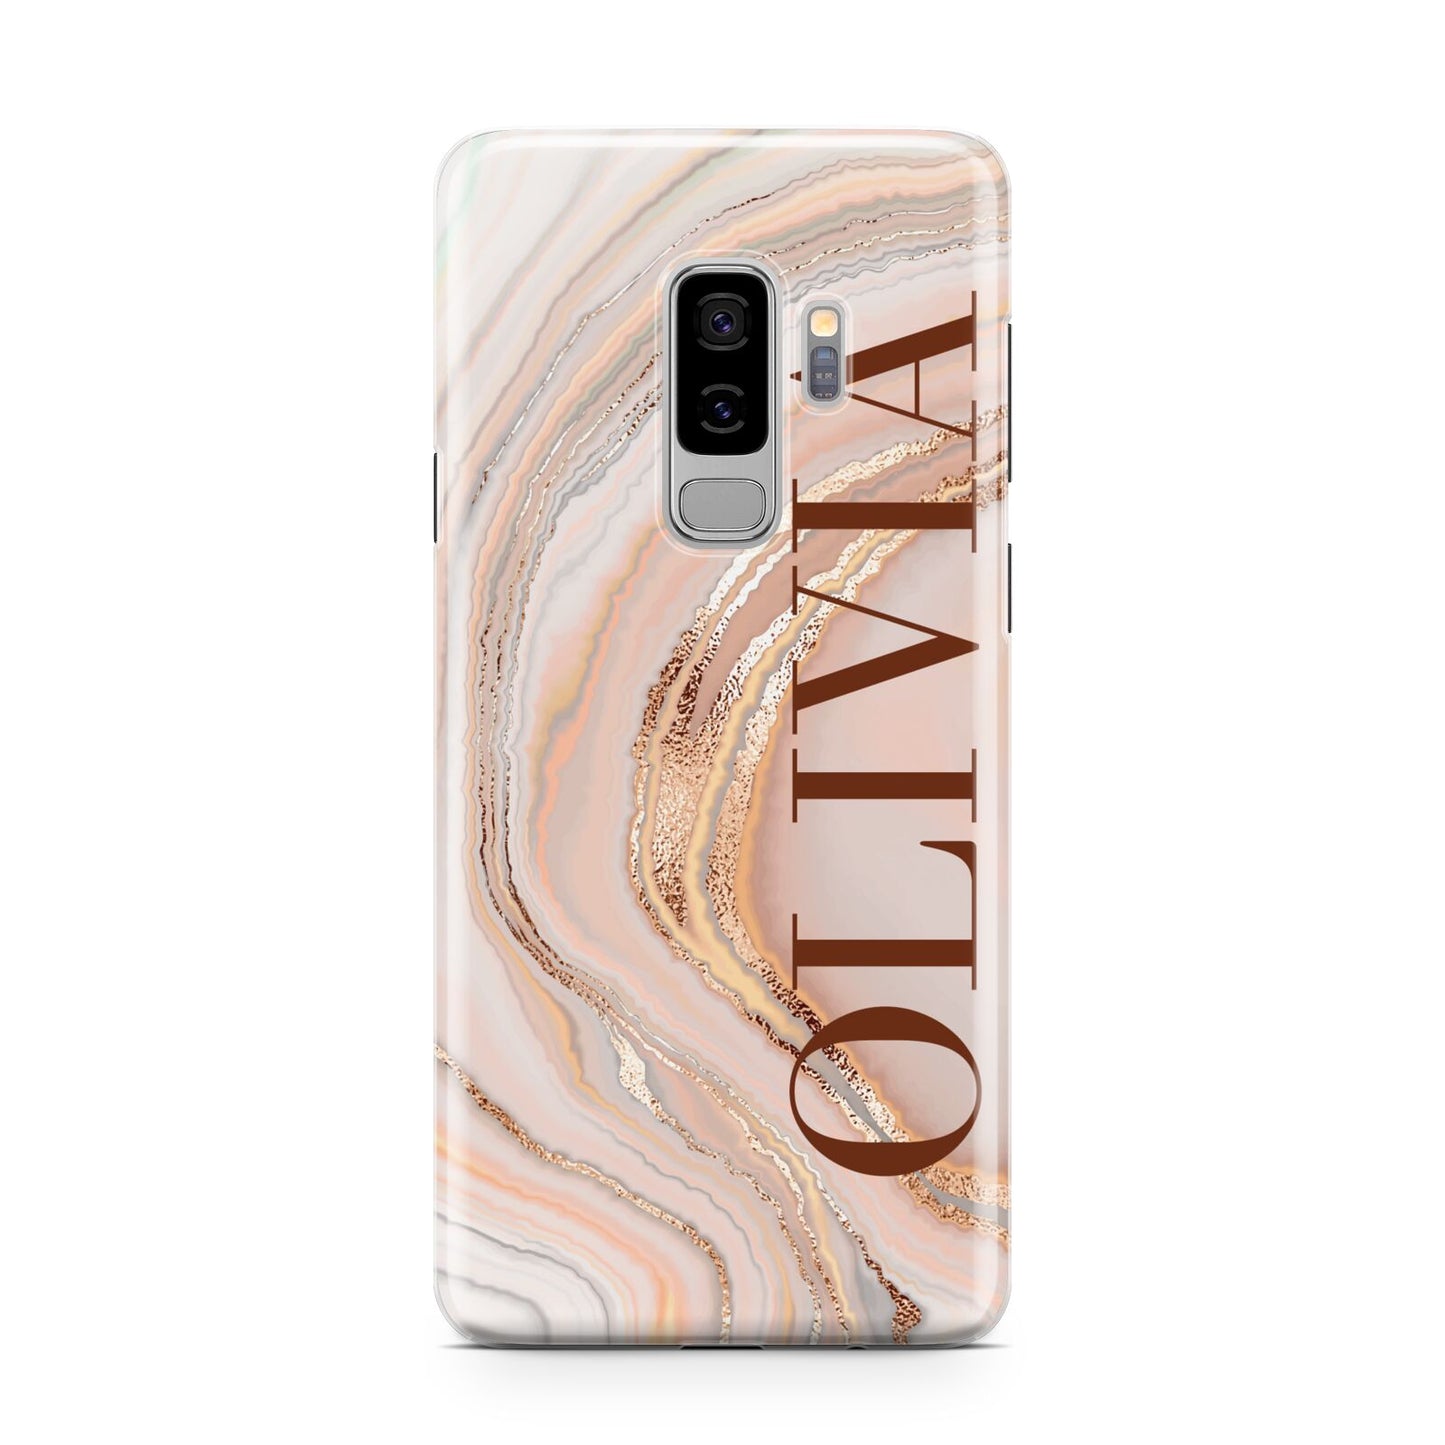 Nude Agate Samsung Galaxy S9 Plus Case on Silver phone